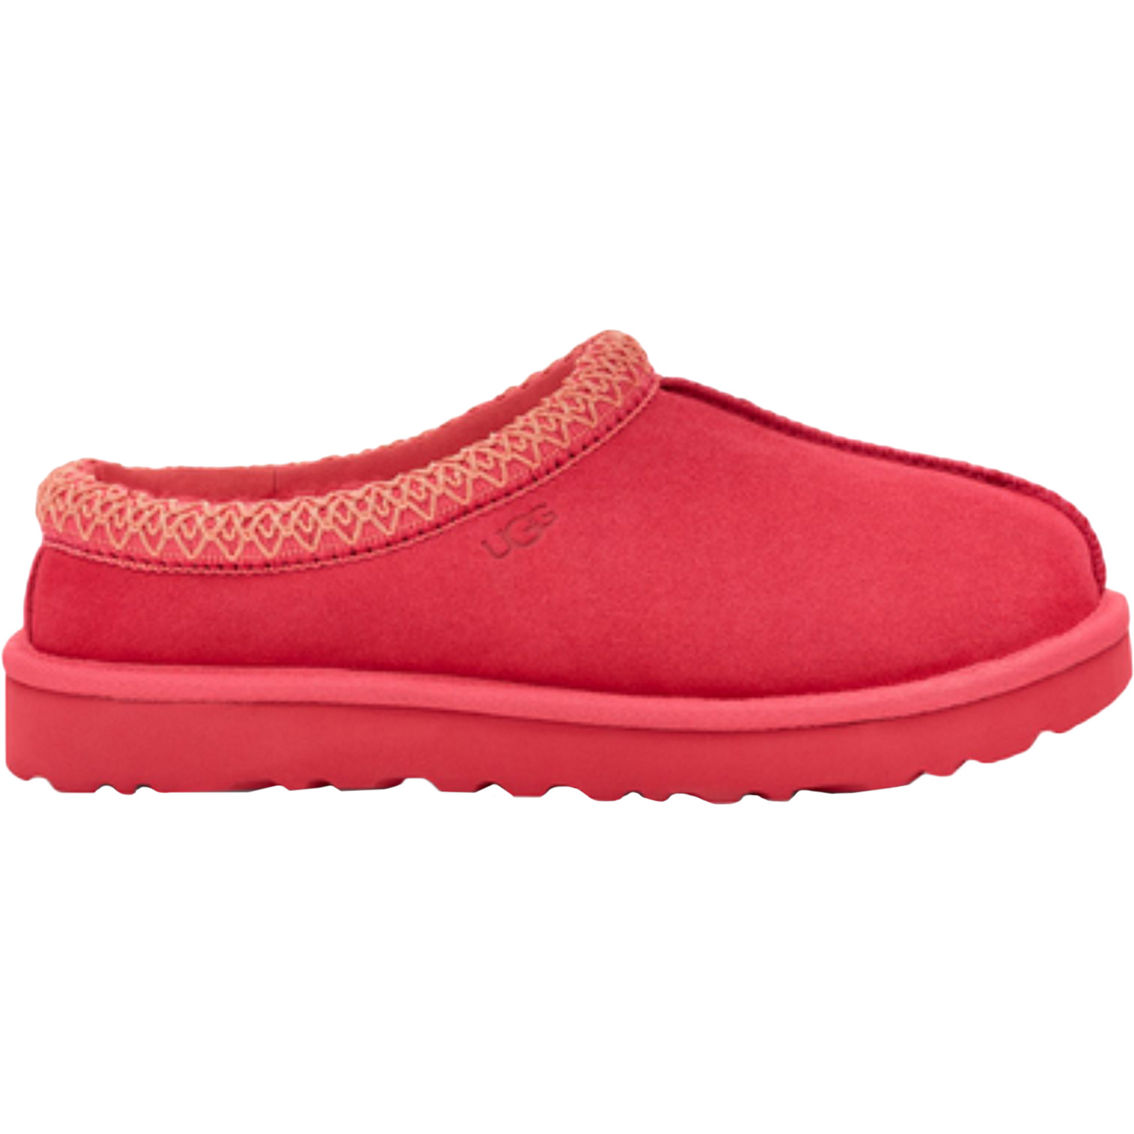 Ugg Tasman Slippers | Slippers | Shoes | Shop The Exchange